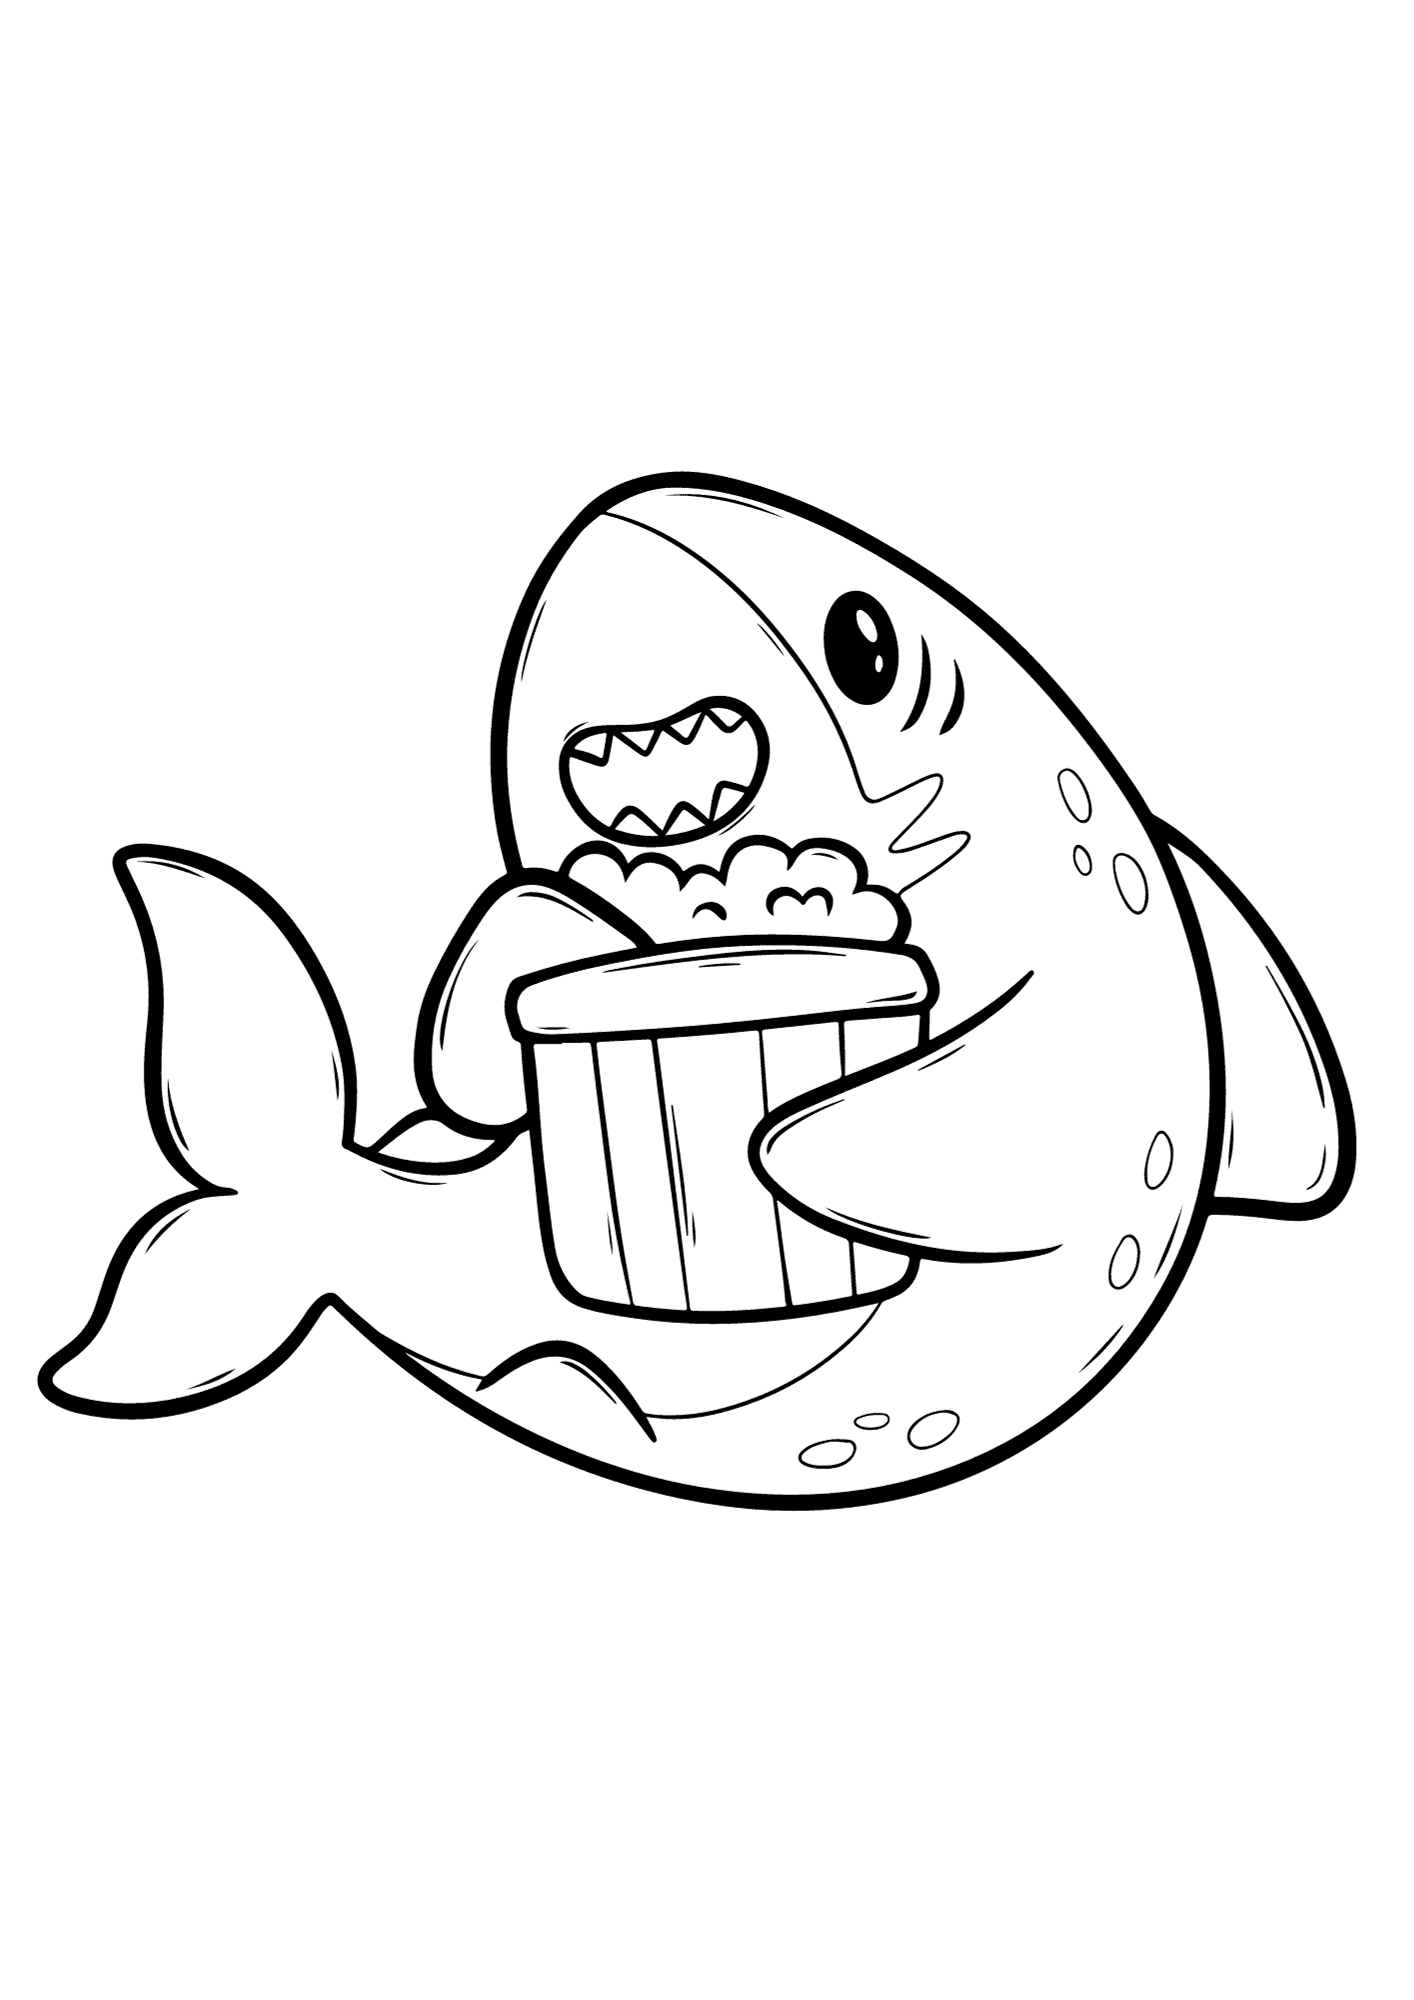 Shark Cartoon For Children Coloring Page